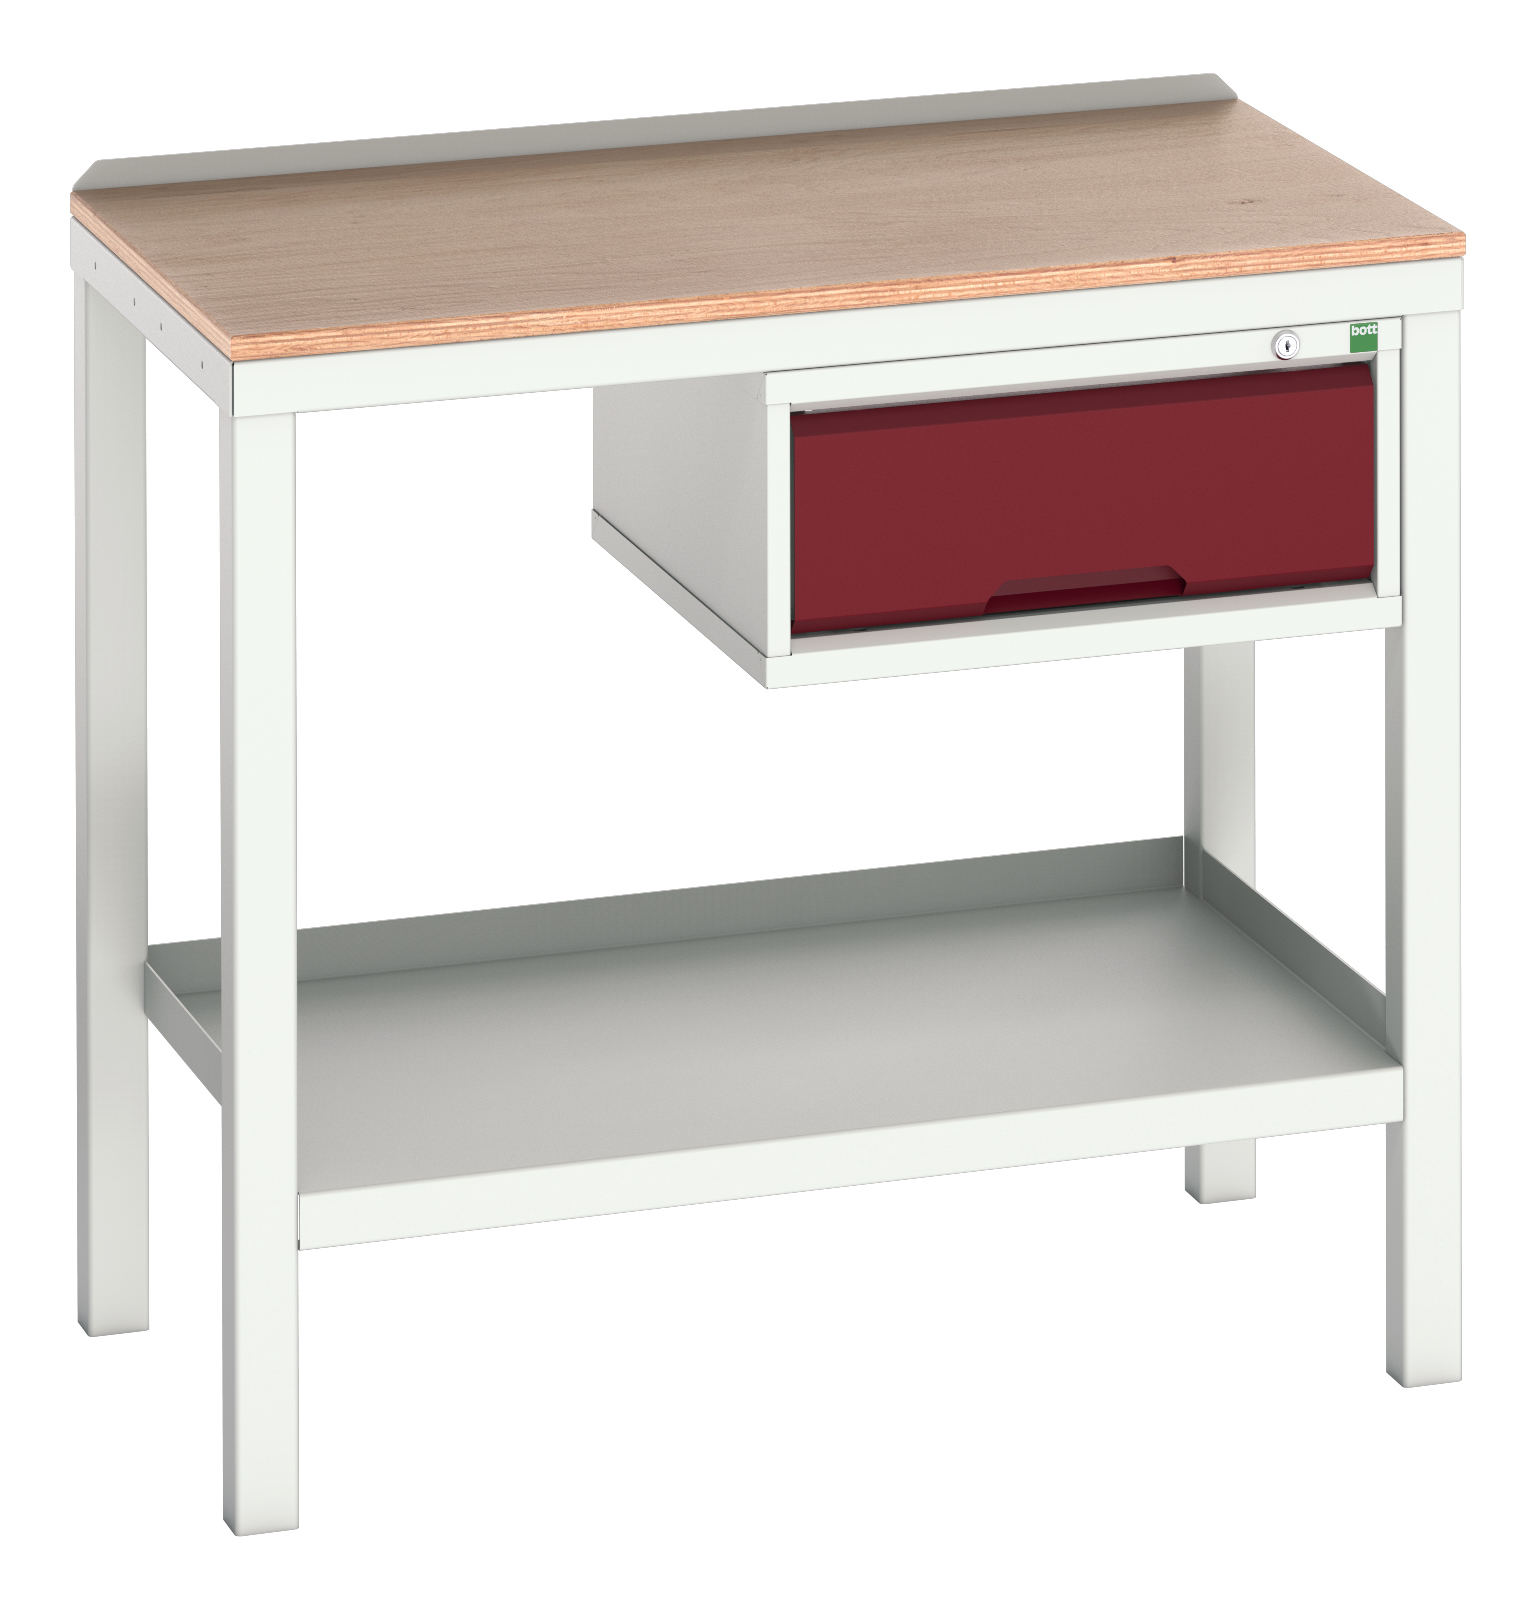 Bott Verso Welded Bench With 1 Drawer Cabinet - 16922601.24